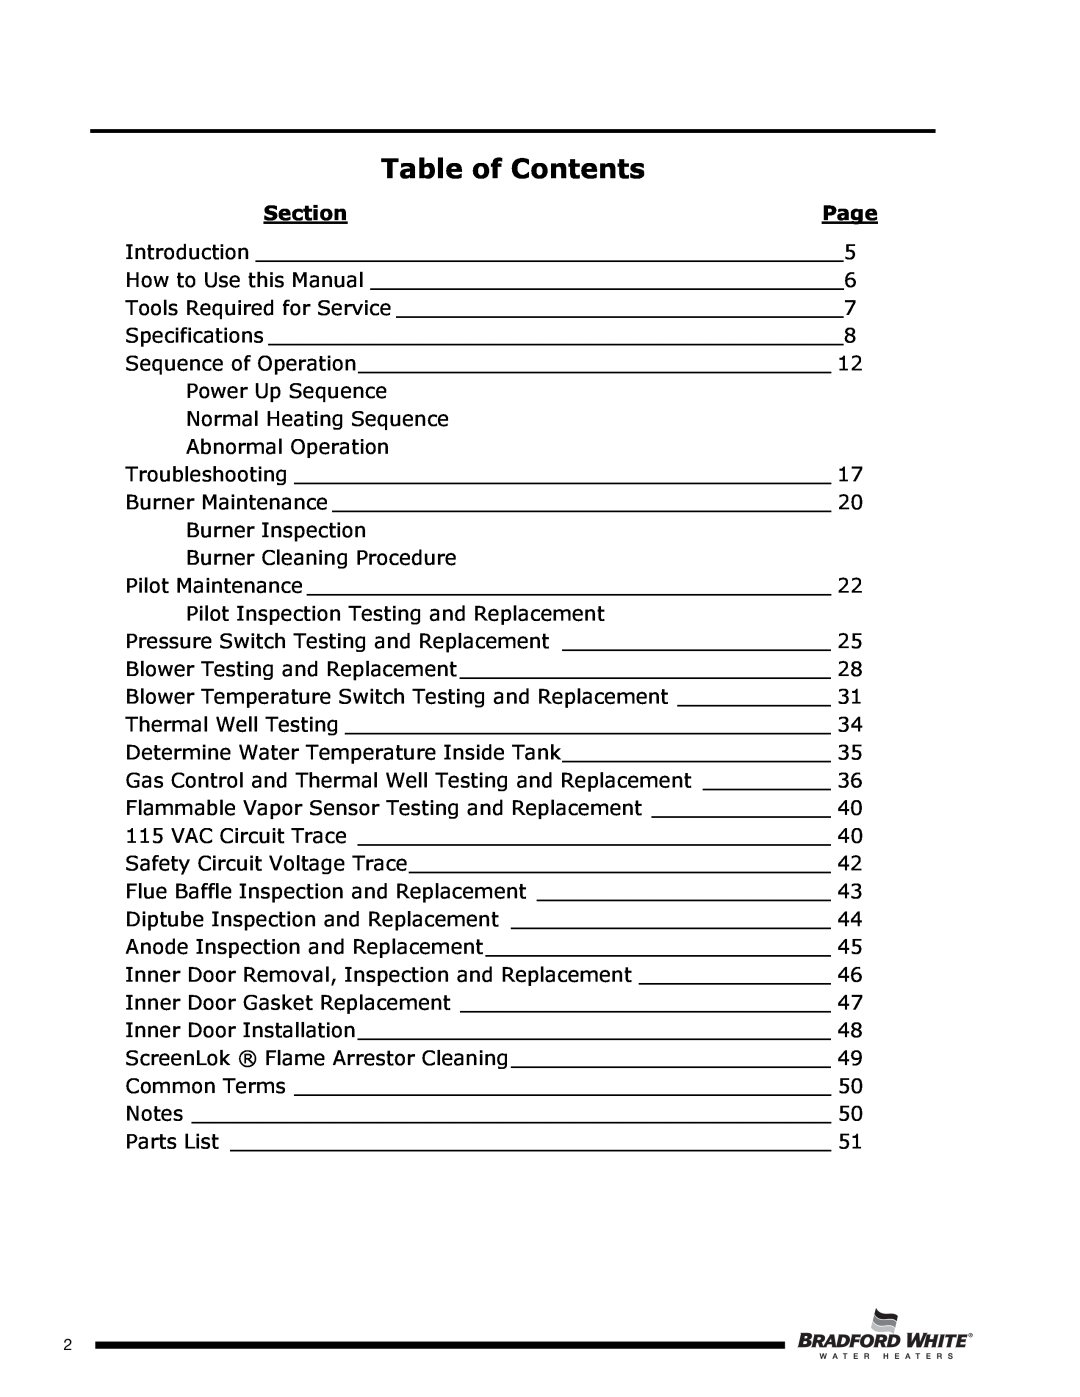 Bradford-White Corp U4TW60T*FRN, U4TW50T*FRN, U4TW40T*FRN service manual Section, Page, Table of Contents 